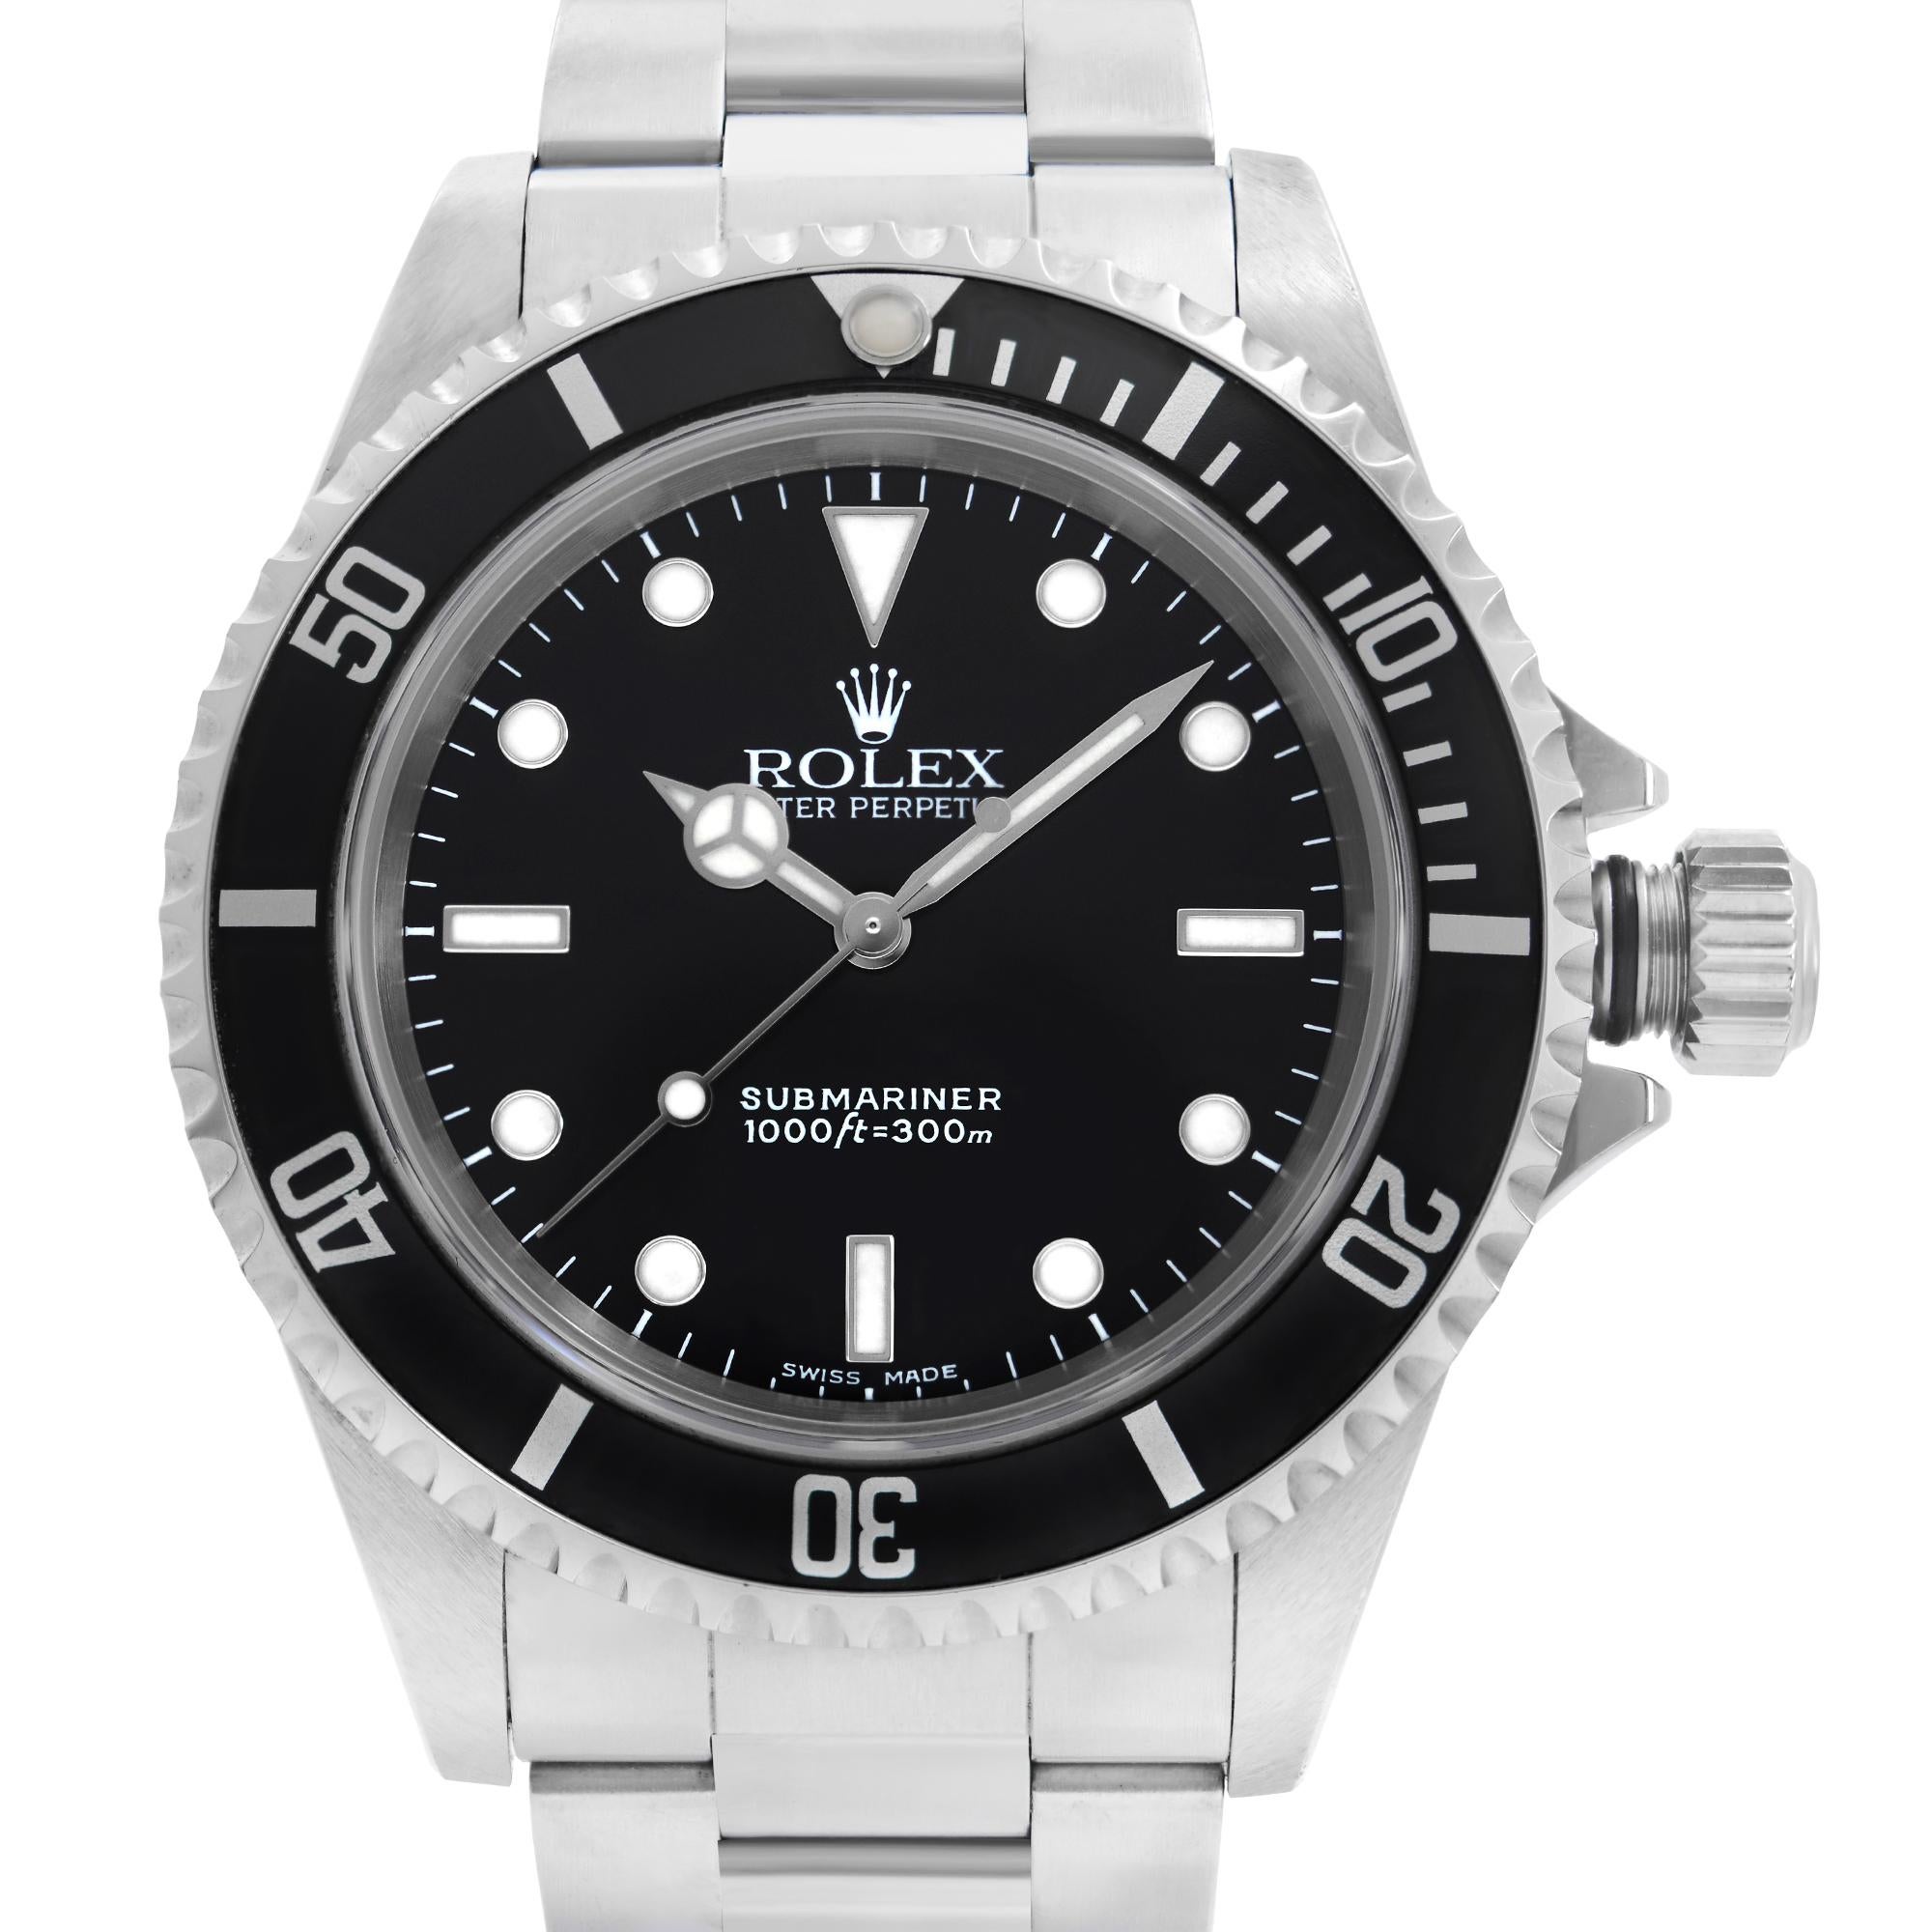 Pre-owned Rolex Submariner 40mm Stainless Steel Black Dial Automatic Men's Watch. This Beautiful Timepiece Was Produced in 2002. The Bezel Has a Dent Next to Number 20.  The back case has the original Rolex green sticker. The band has minor slack.